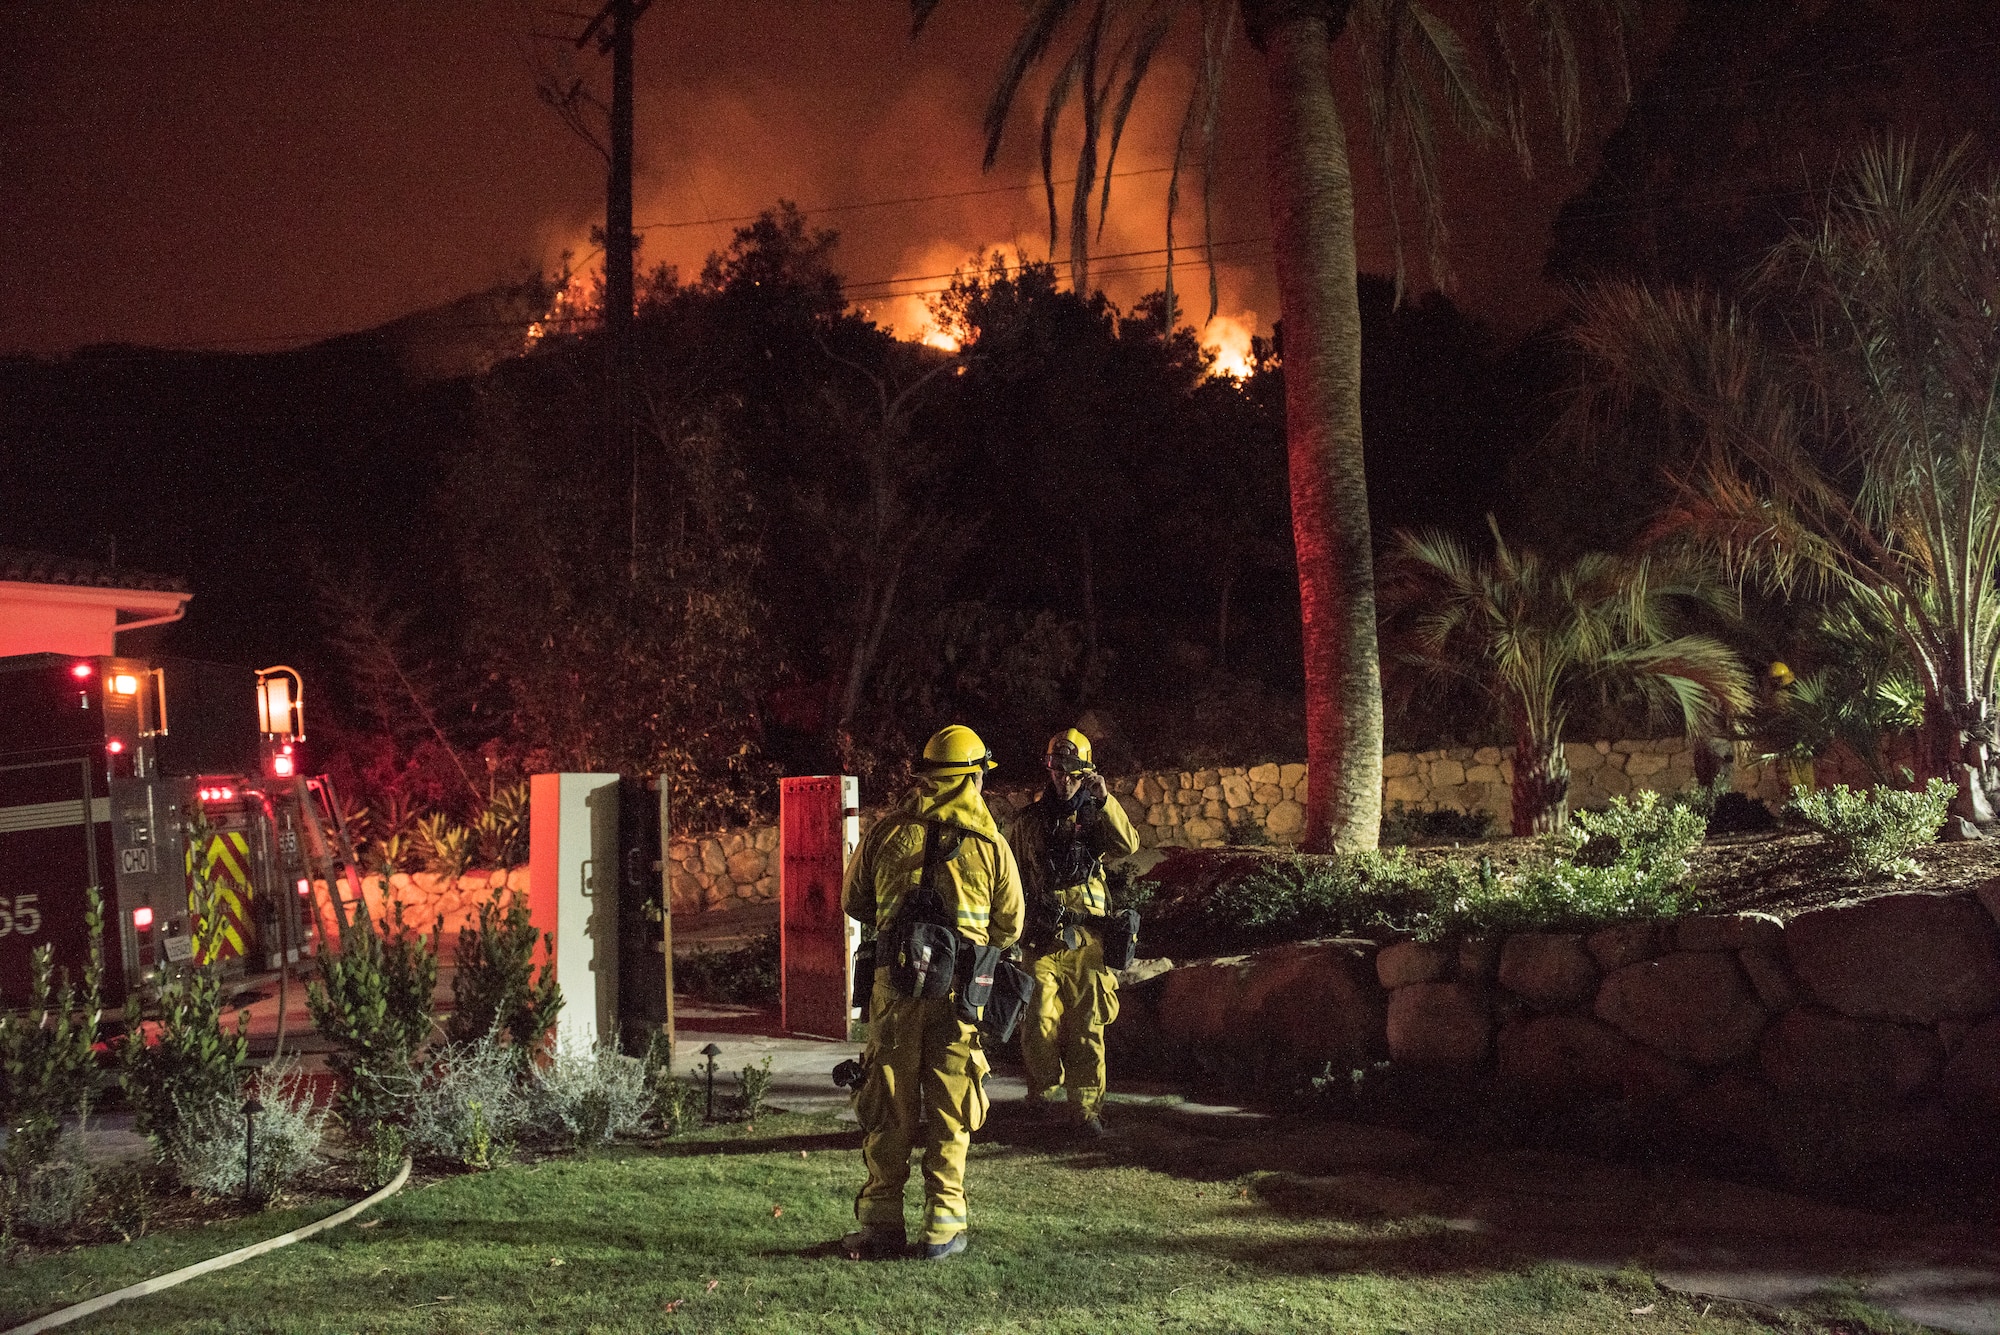 Chino Valley firefighters watch the oncoming flames of the Thomas Fire from the yard of a home in Montecito, California, Dec. 12, 2017. C-130Js of the 146th Airlift Wing at Channel Islands Air National Guard Base in Port Hueneme, carried the Modular Airborne Fire Fighting System and dropped fire suppression chemicals onto the fire's path to slow its advance in support of firefighters on the ground. (U.S. Air Force photo by J.M. Eddins Jr.)